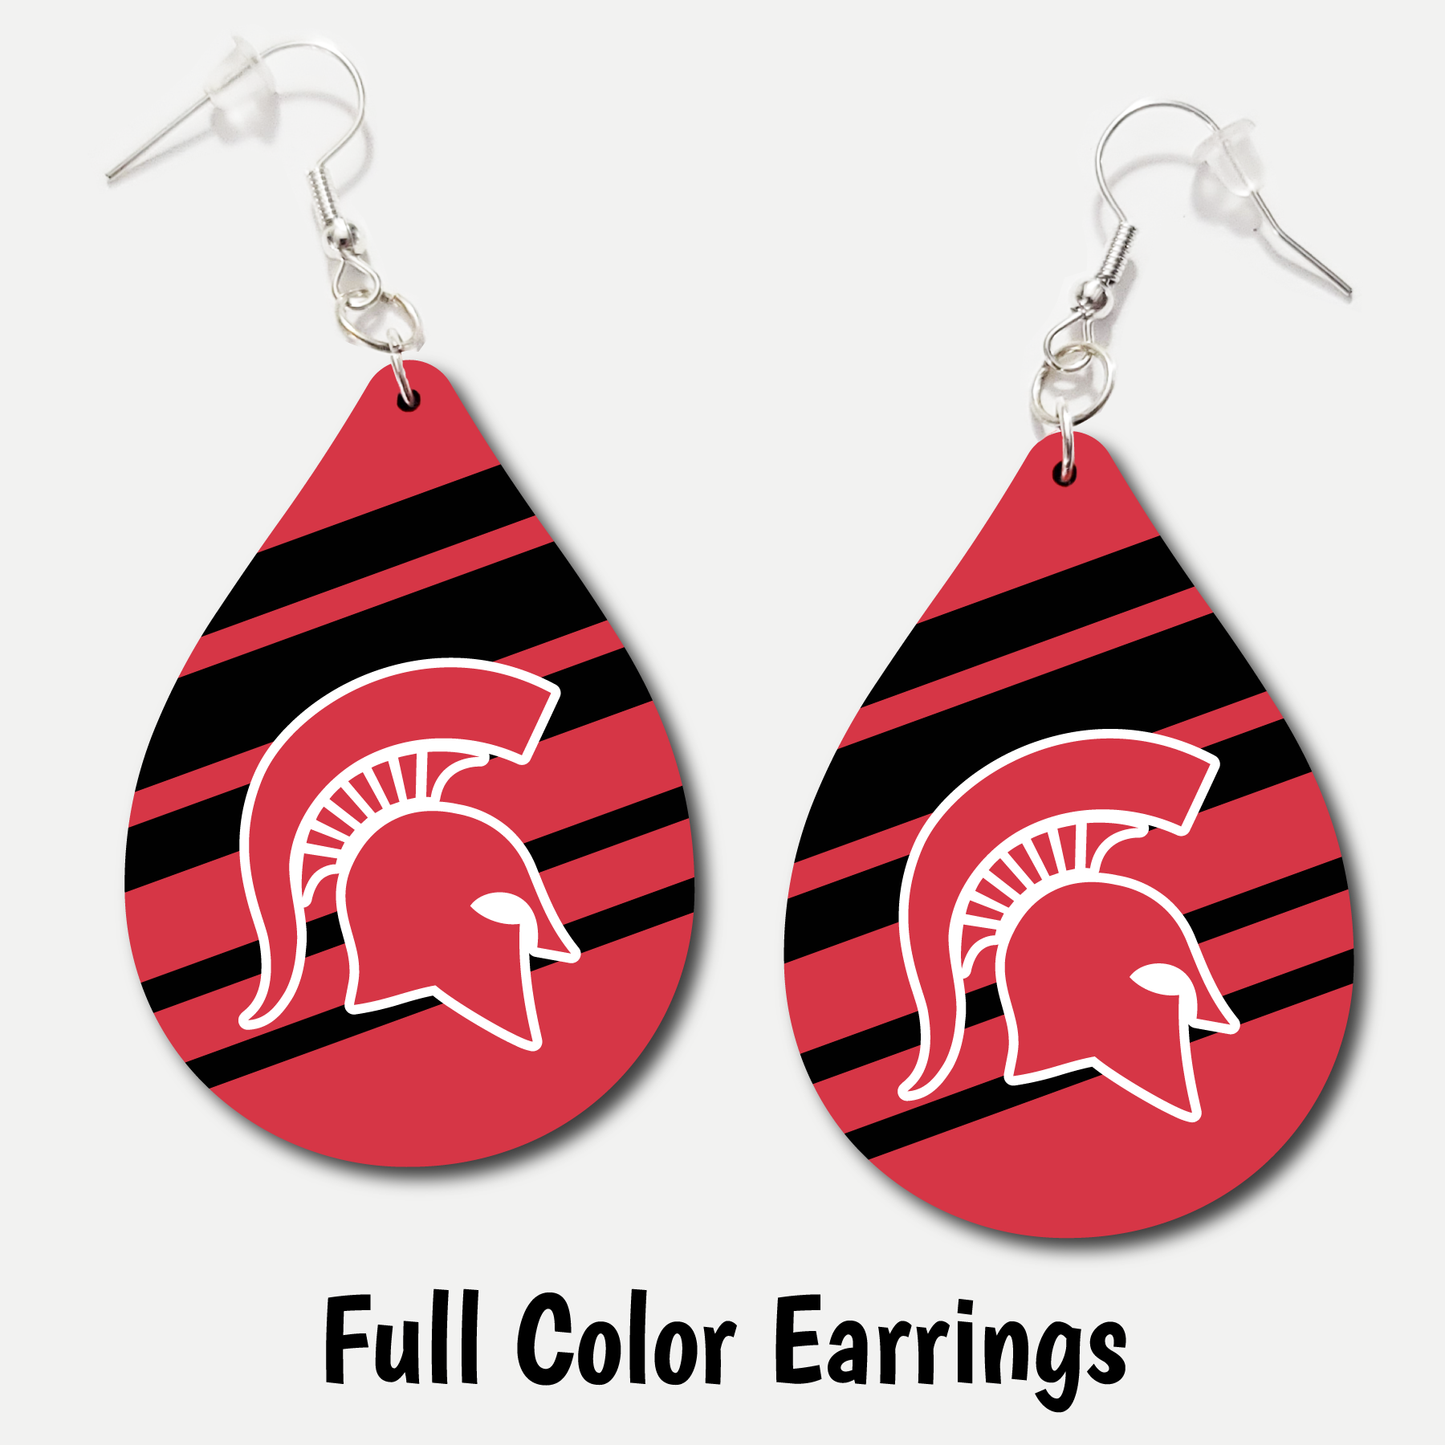 Minico Spartans - Full Color Earrings